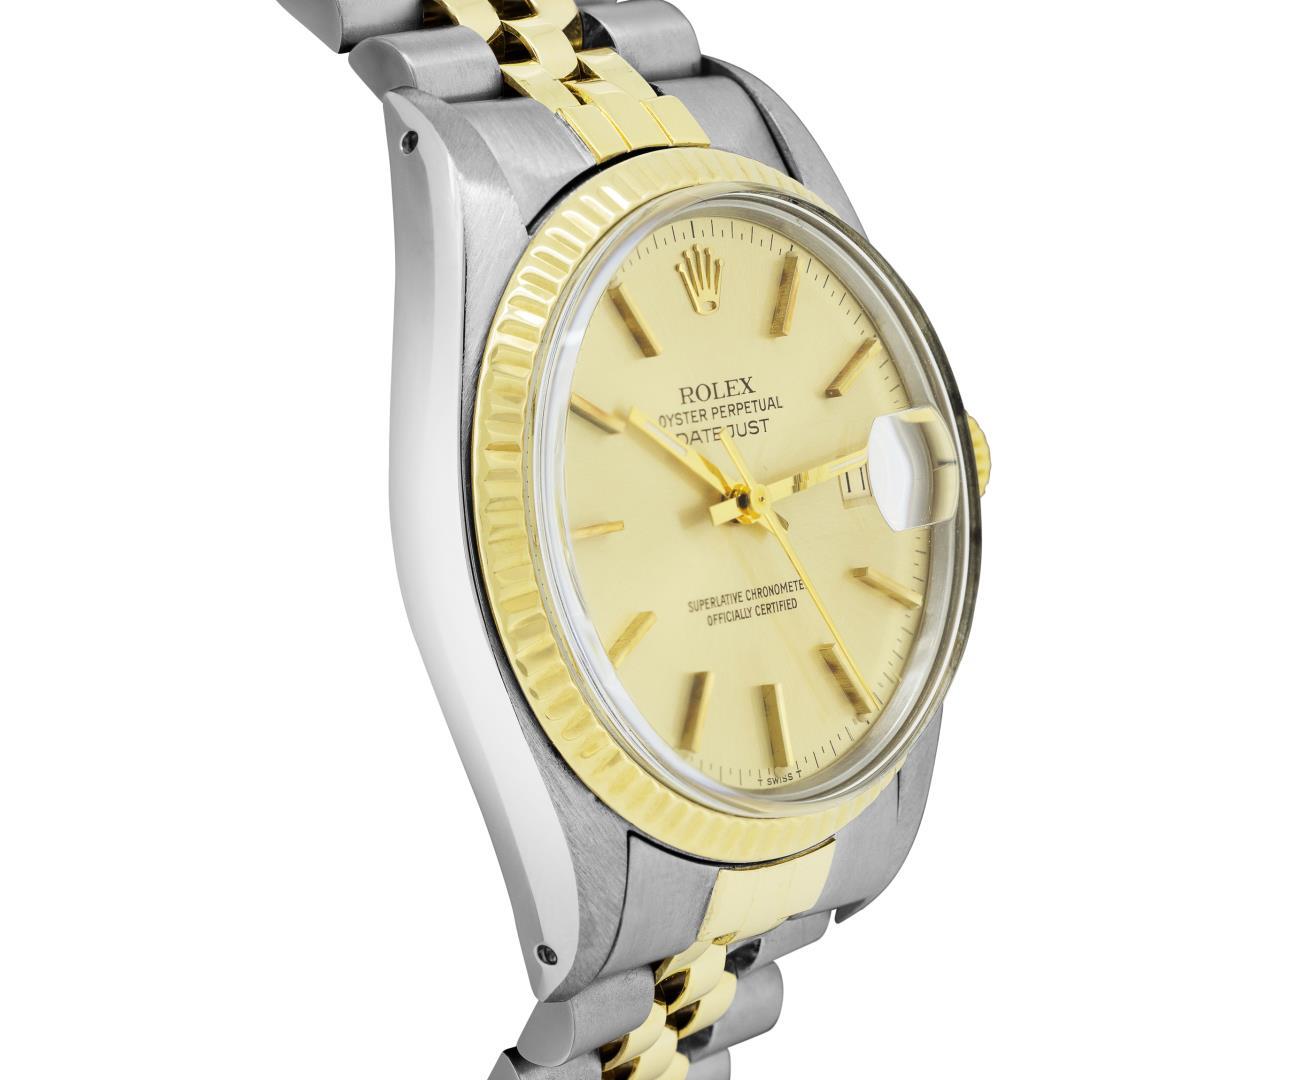 Rolex Mens Two Tone Yellow Gold And Stainless Steel Champagne Index Datejust Wri